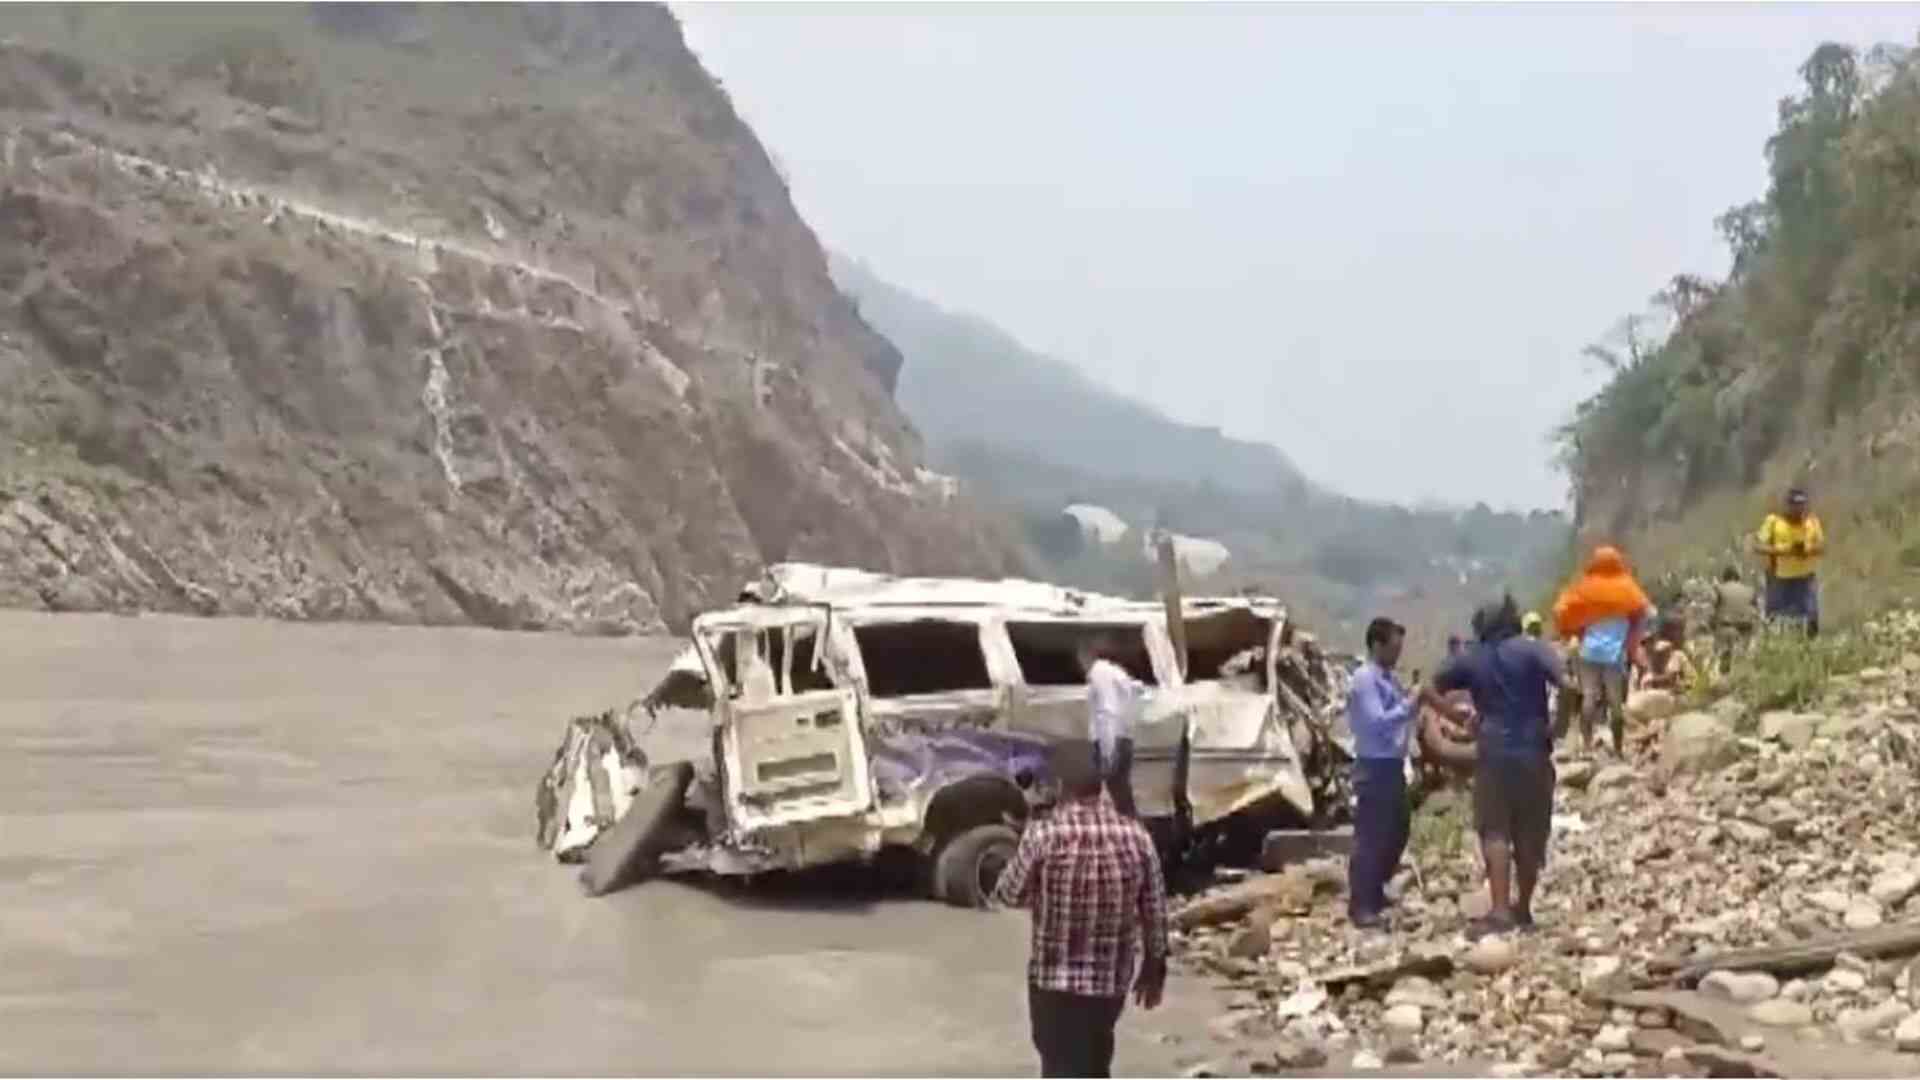 Seven Injured In Rudraprayag Accident Airlifted To AIIMS Rishikesh